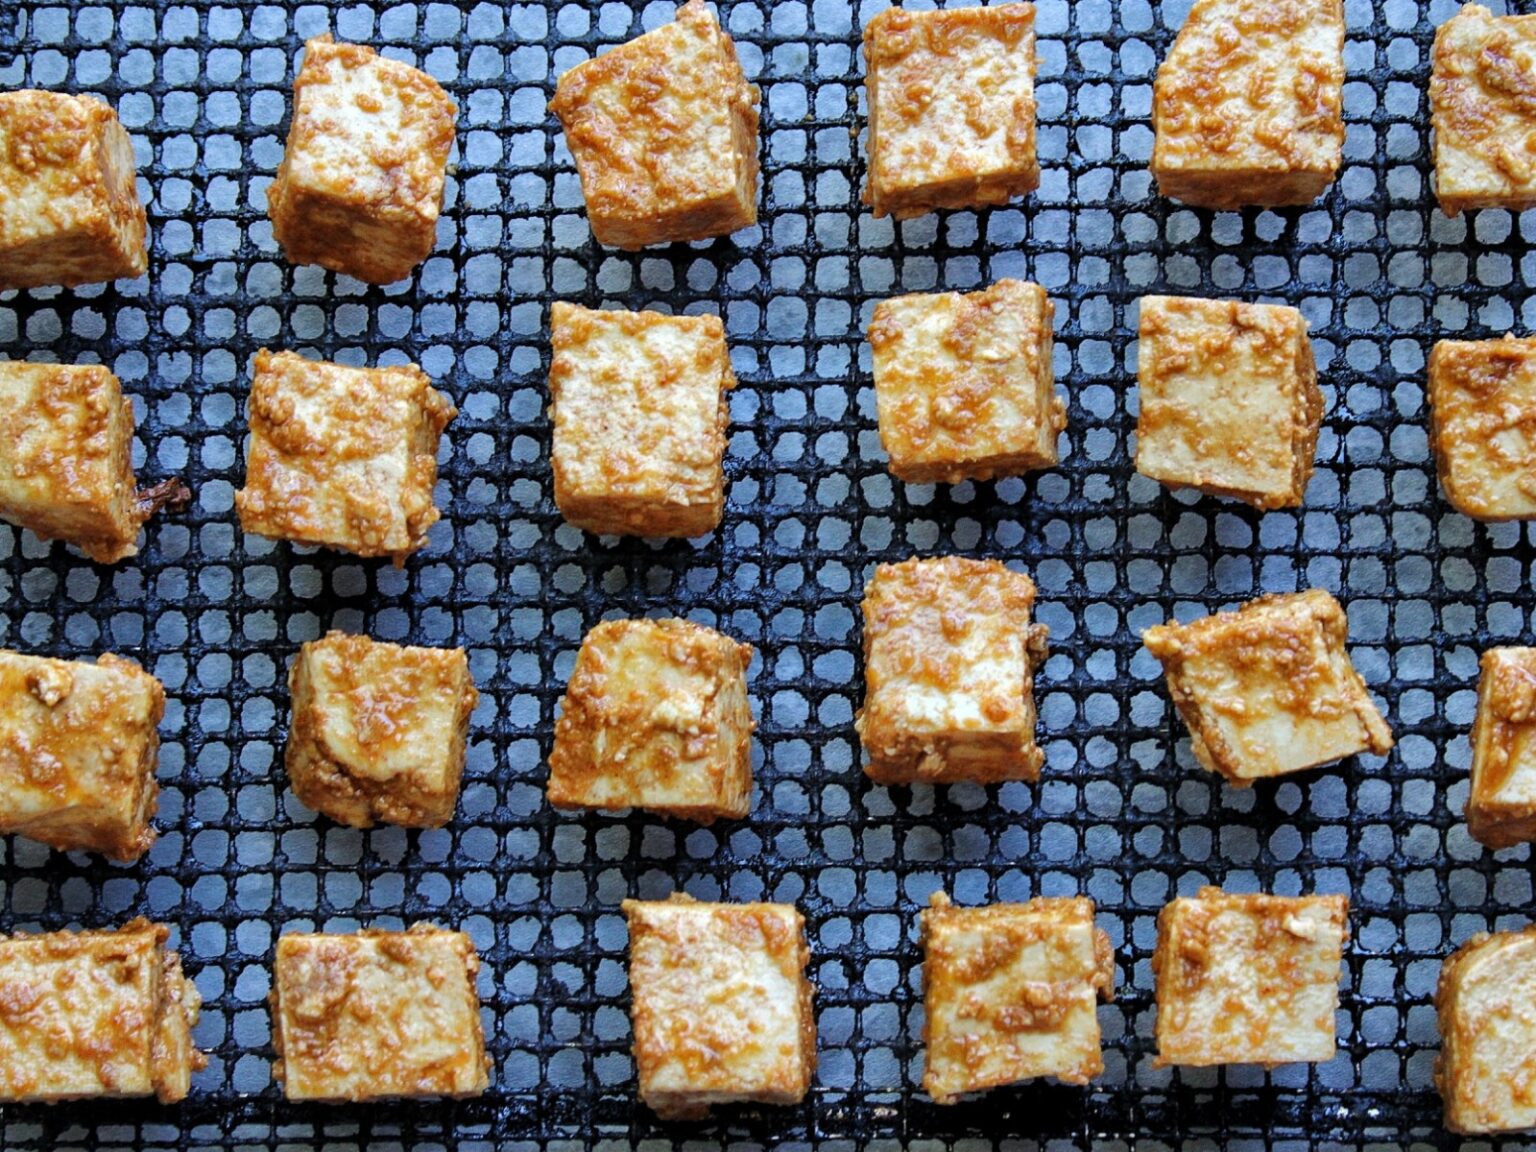 Tofu cubes on an air fryer tray.